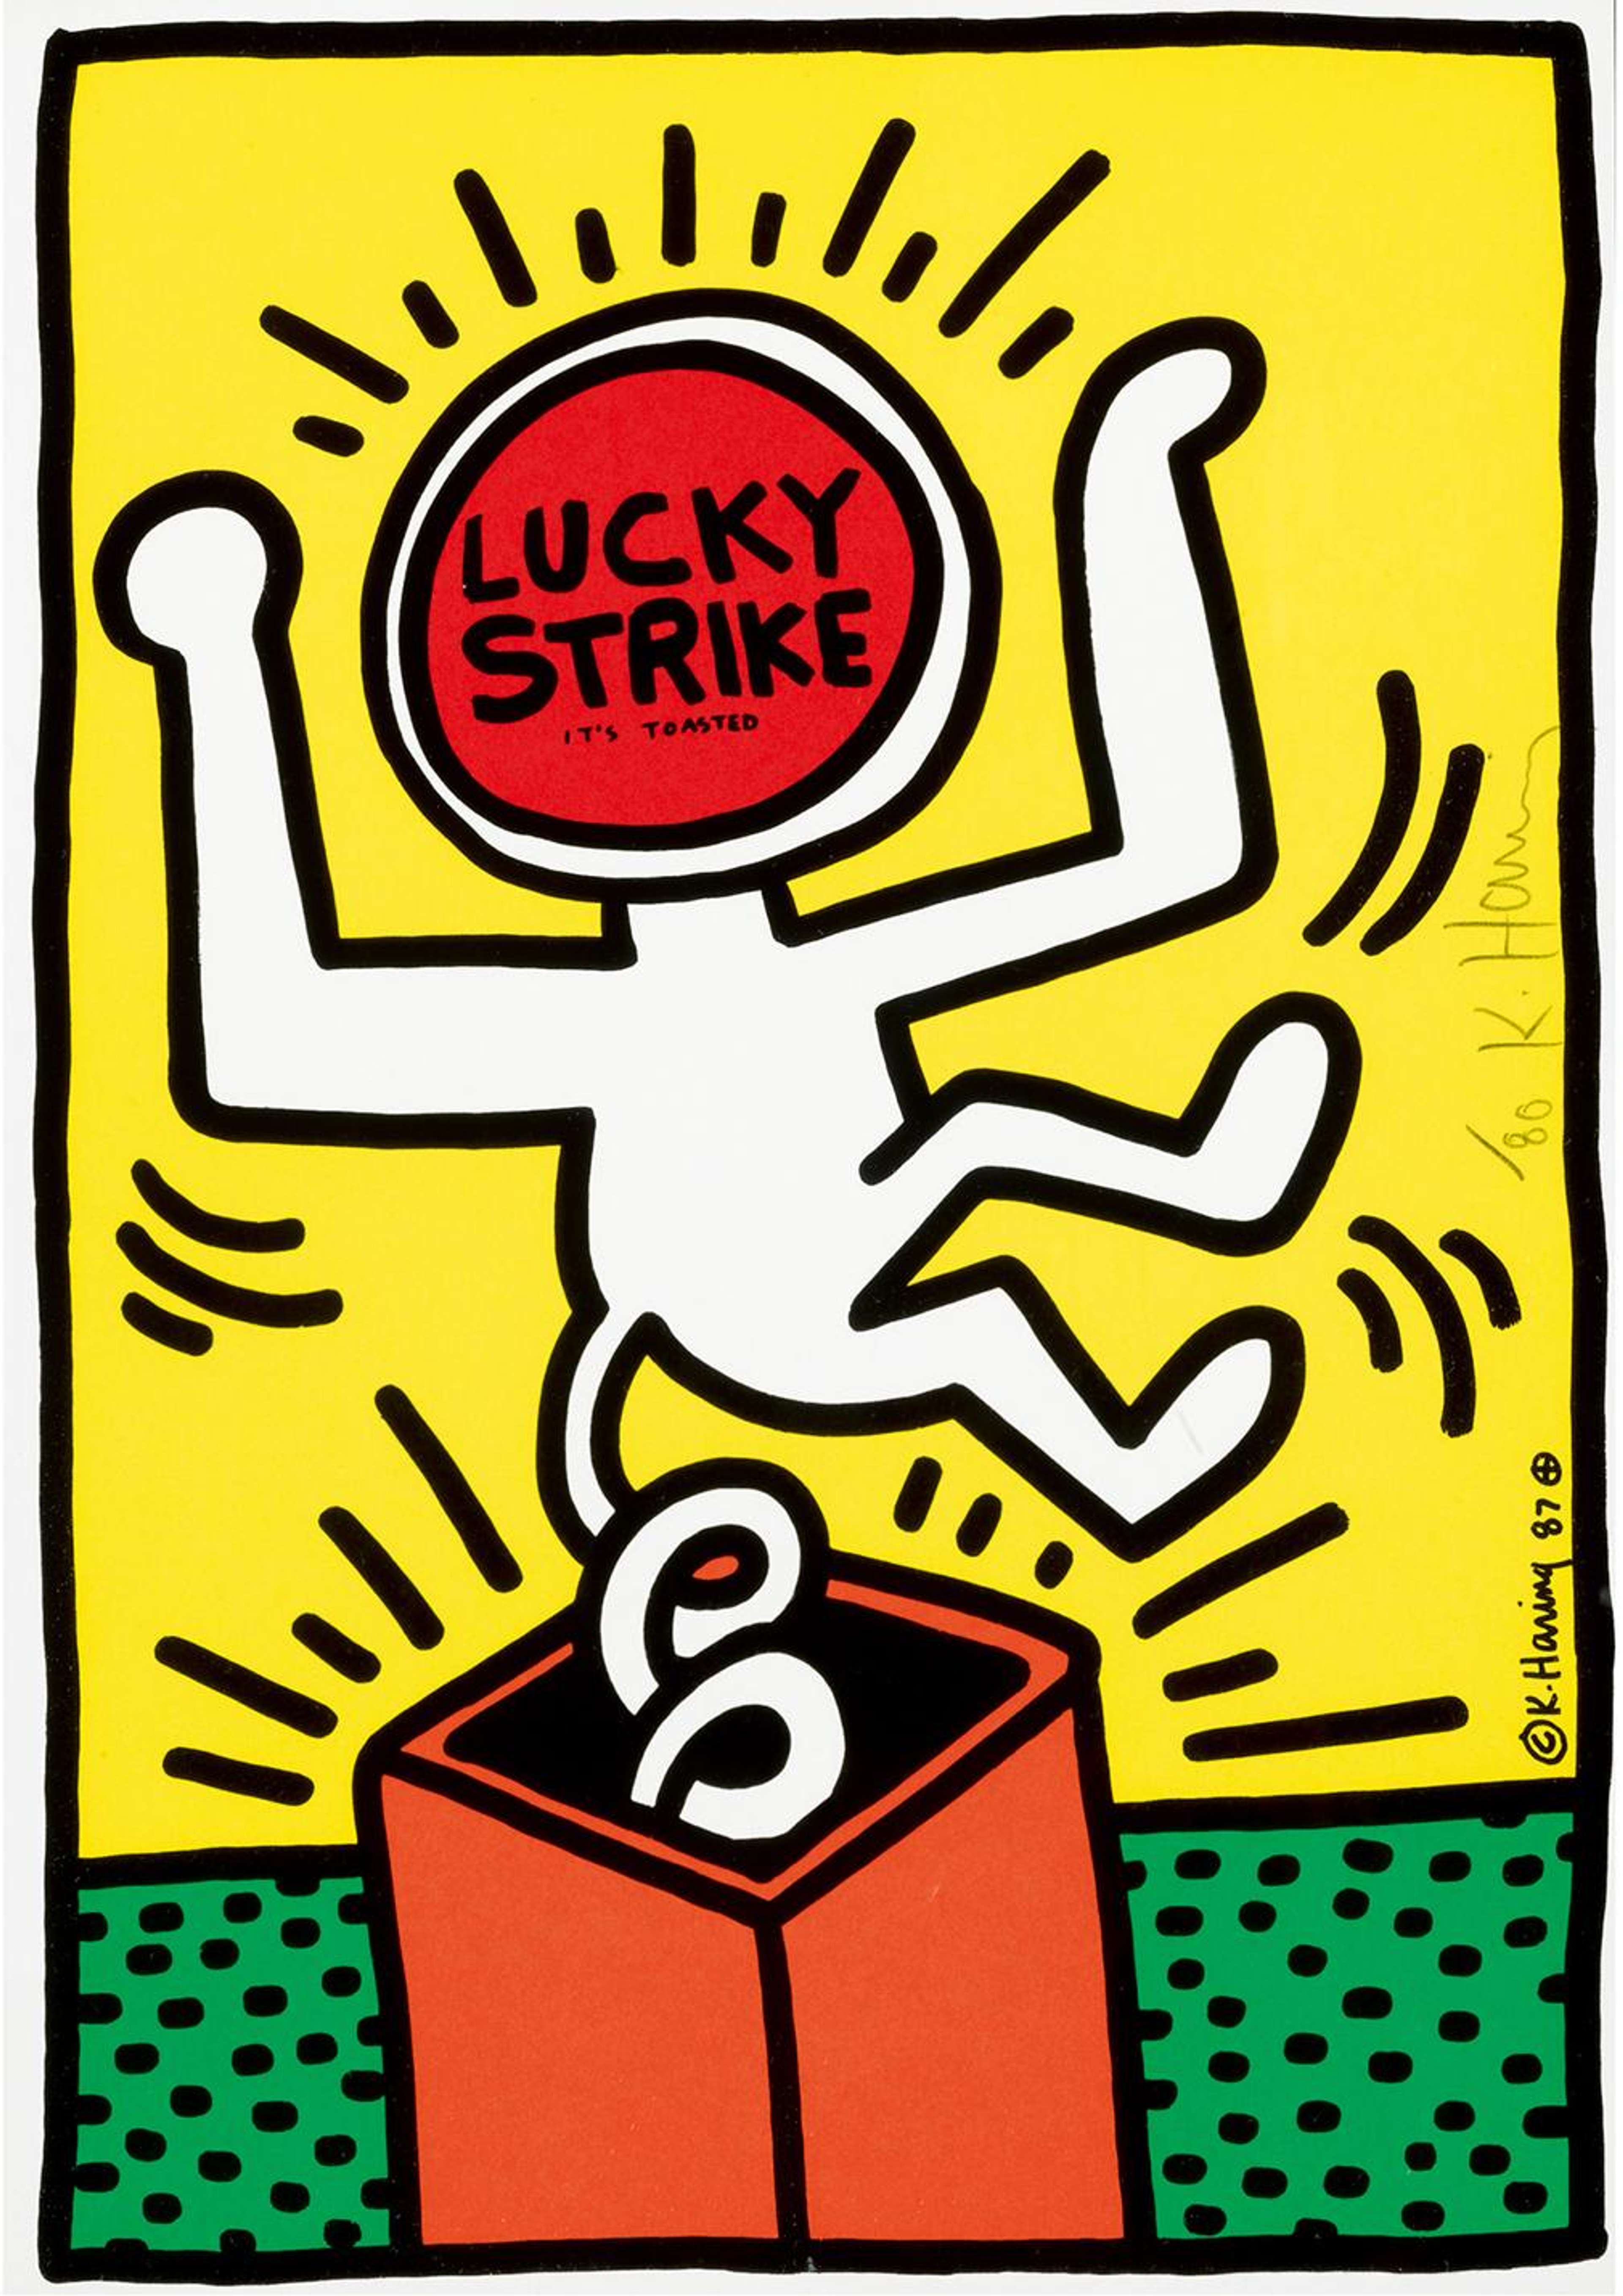 An image of the yellow lucky strike by Keith Haring depicting a figure bouncing up out of a brown box